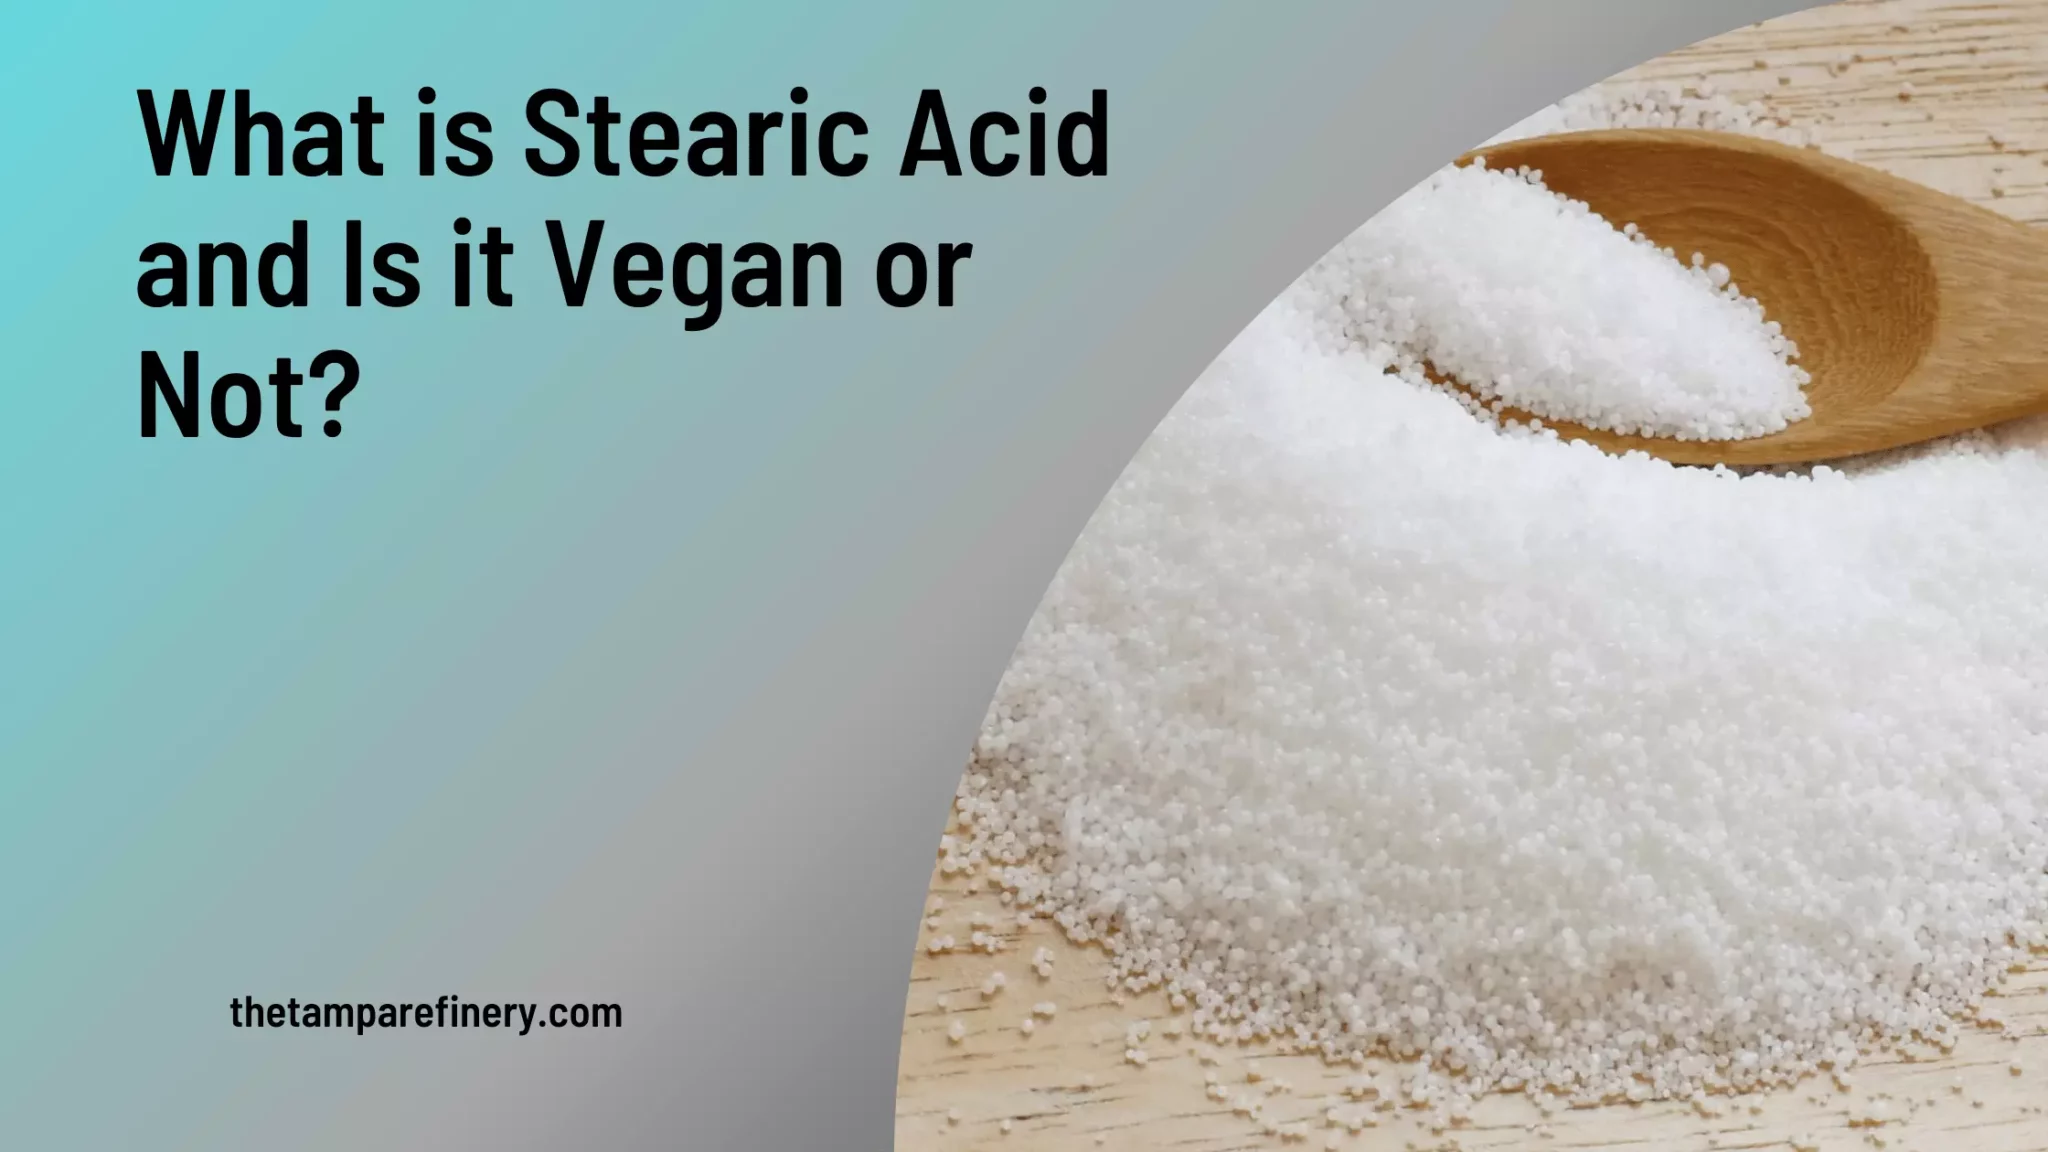 What is Stearic Acid